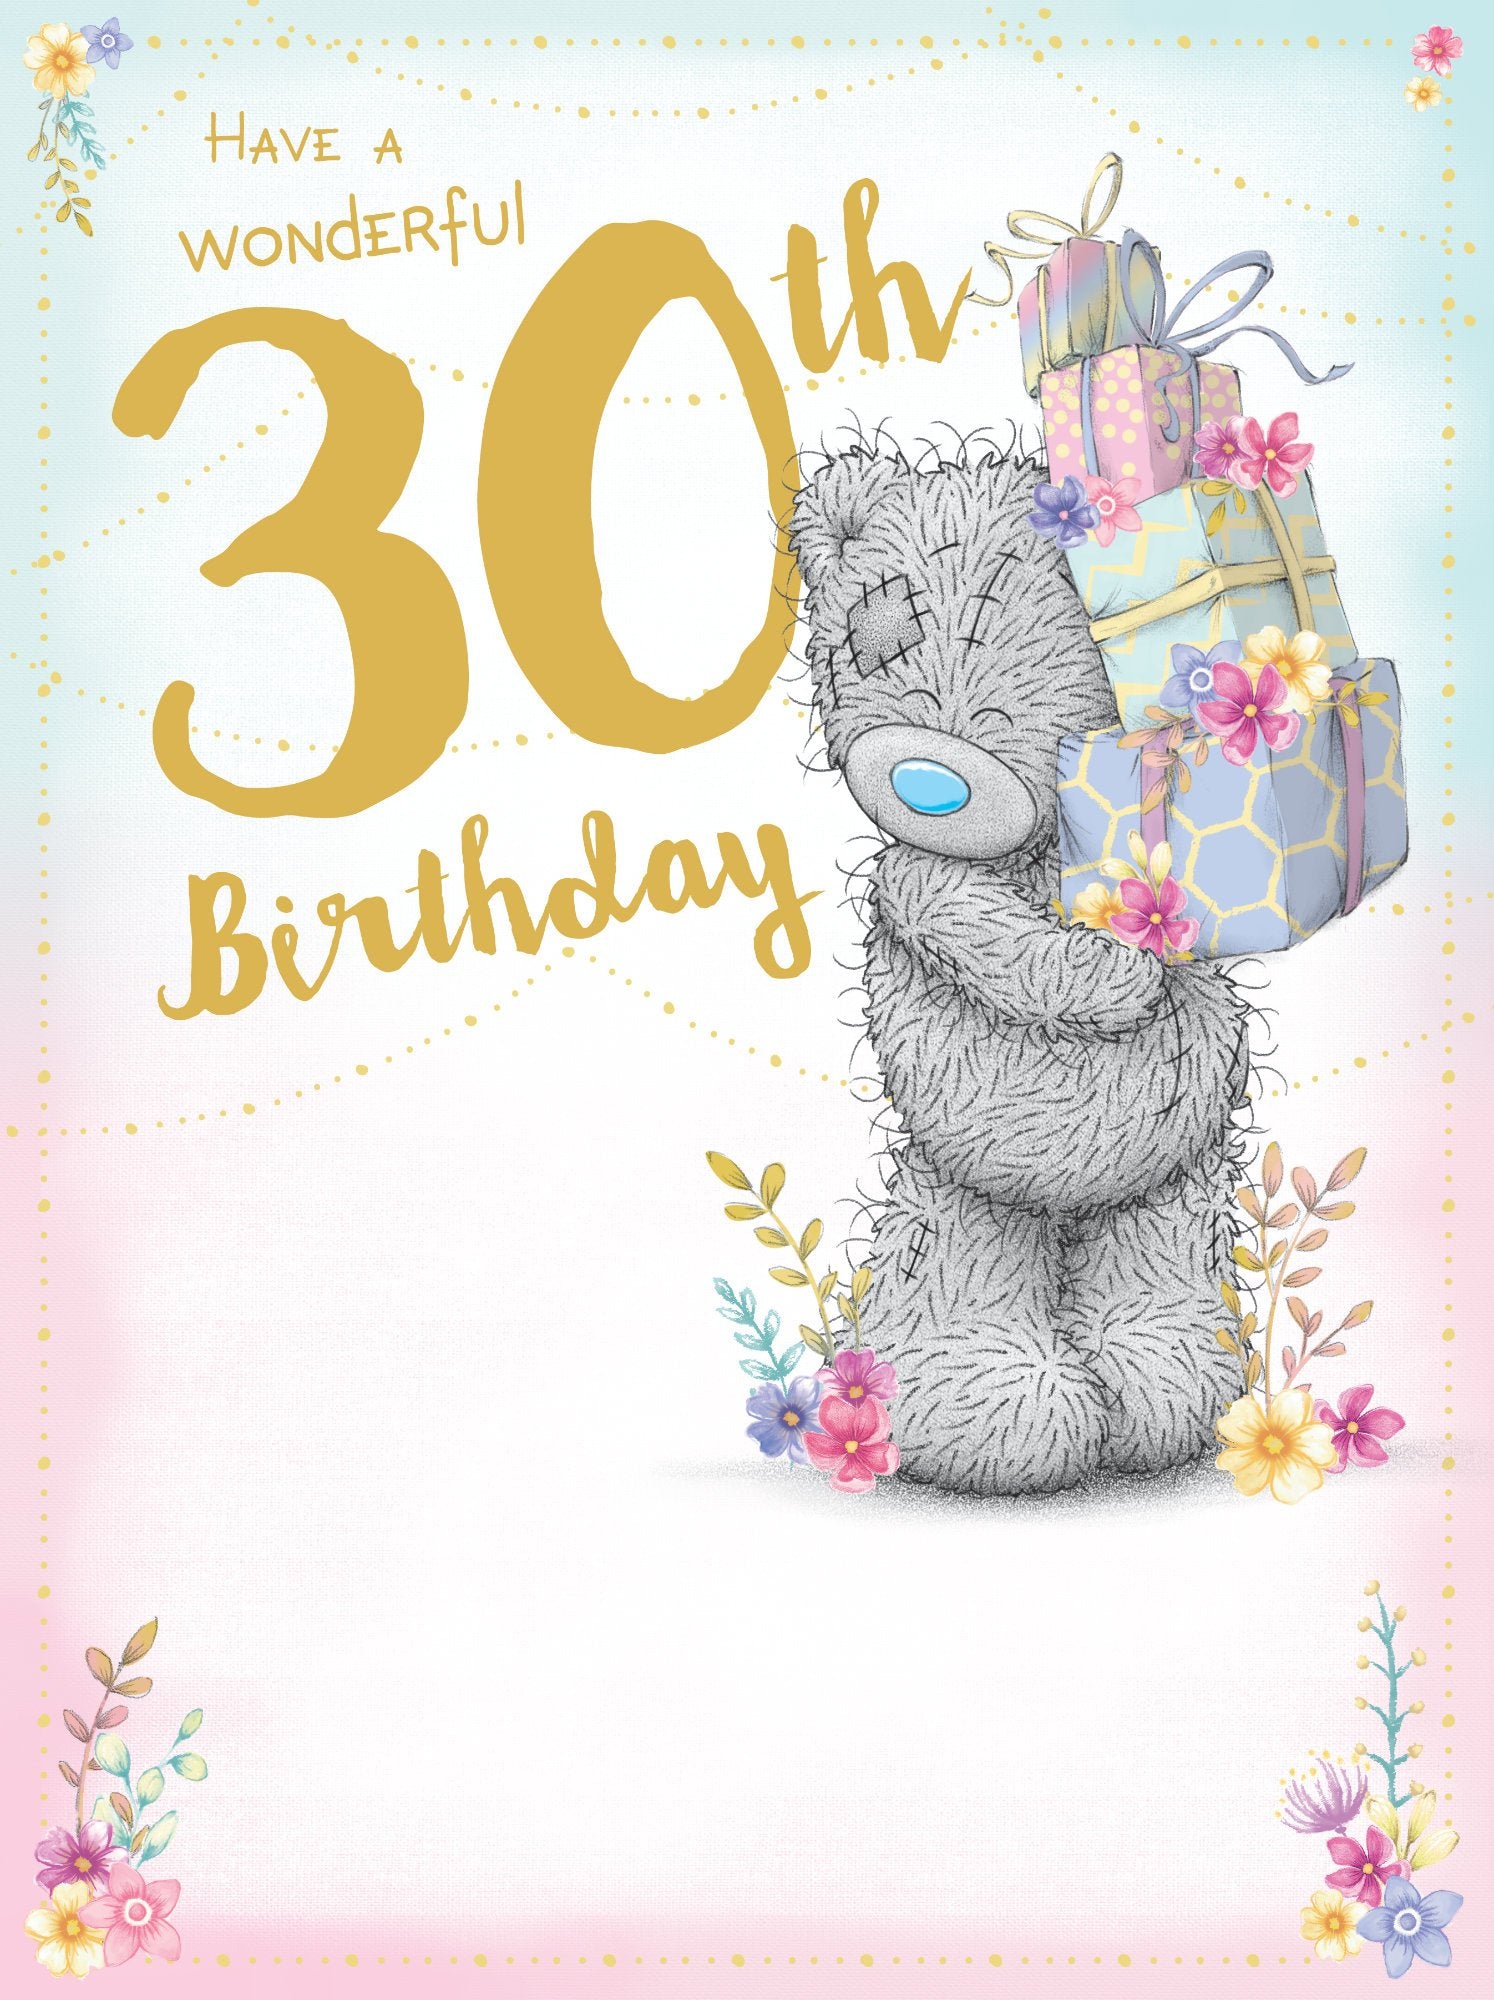 Photograph of 30th Birthday Teddy Presents Greetings Card at Nicole's Shop